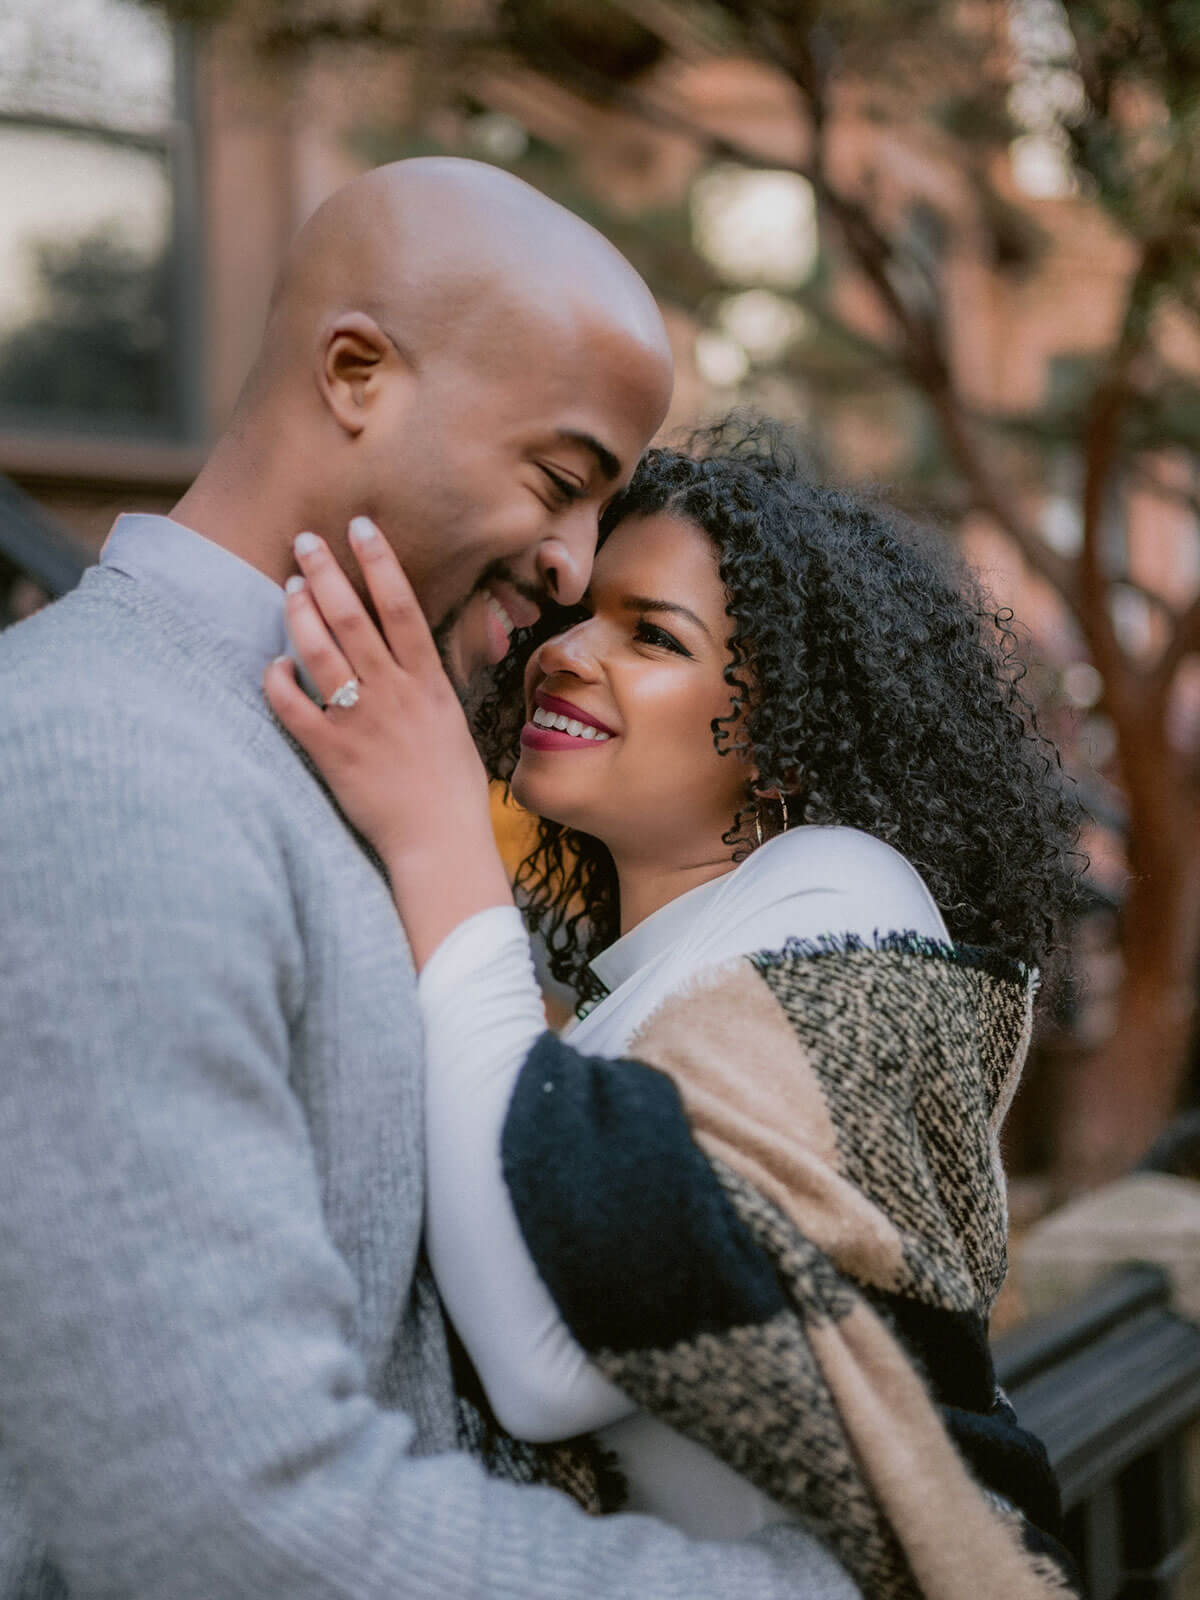 The woman is happily staring at her fiance in Brooklyn. NYC Christmas Engagement Photos by Jenny Fu Studio